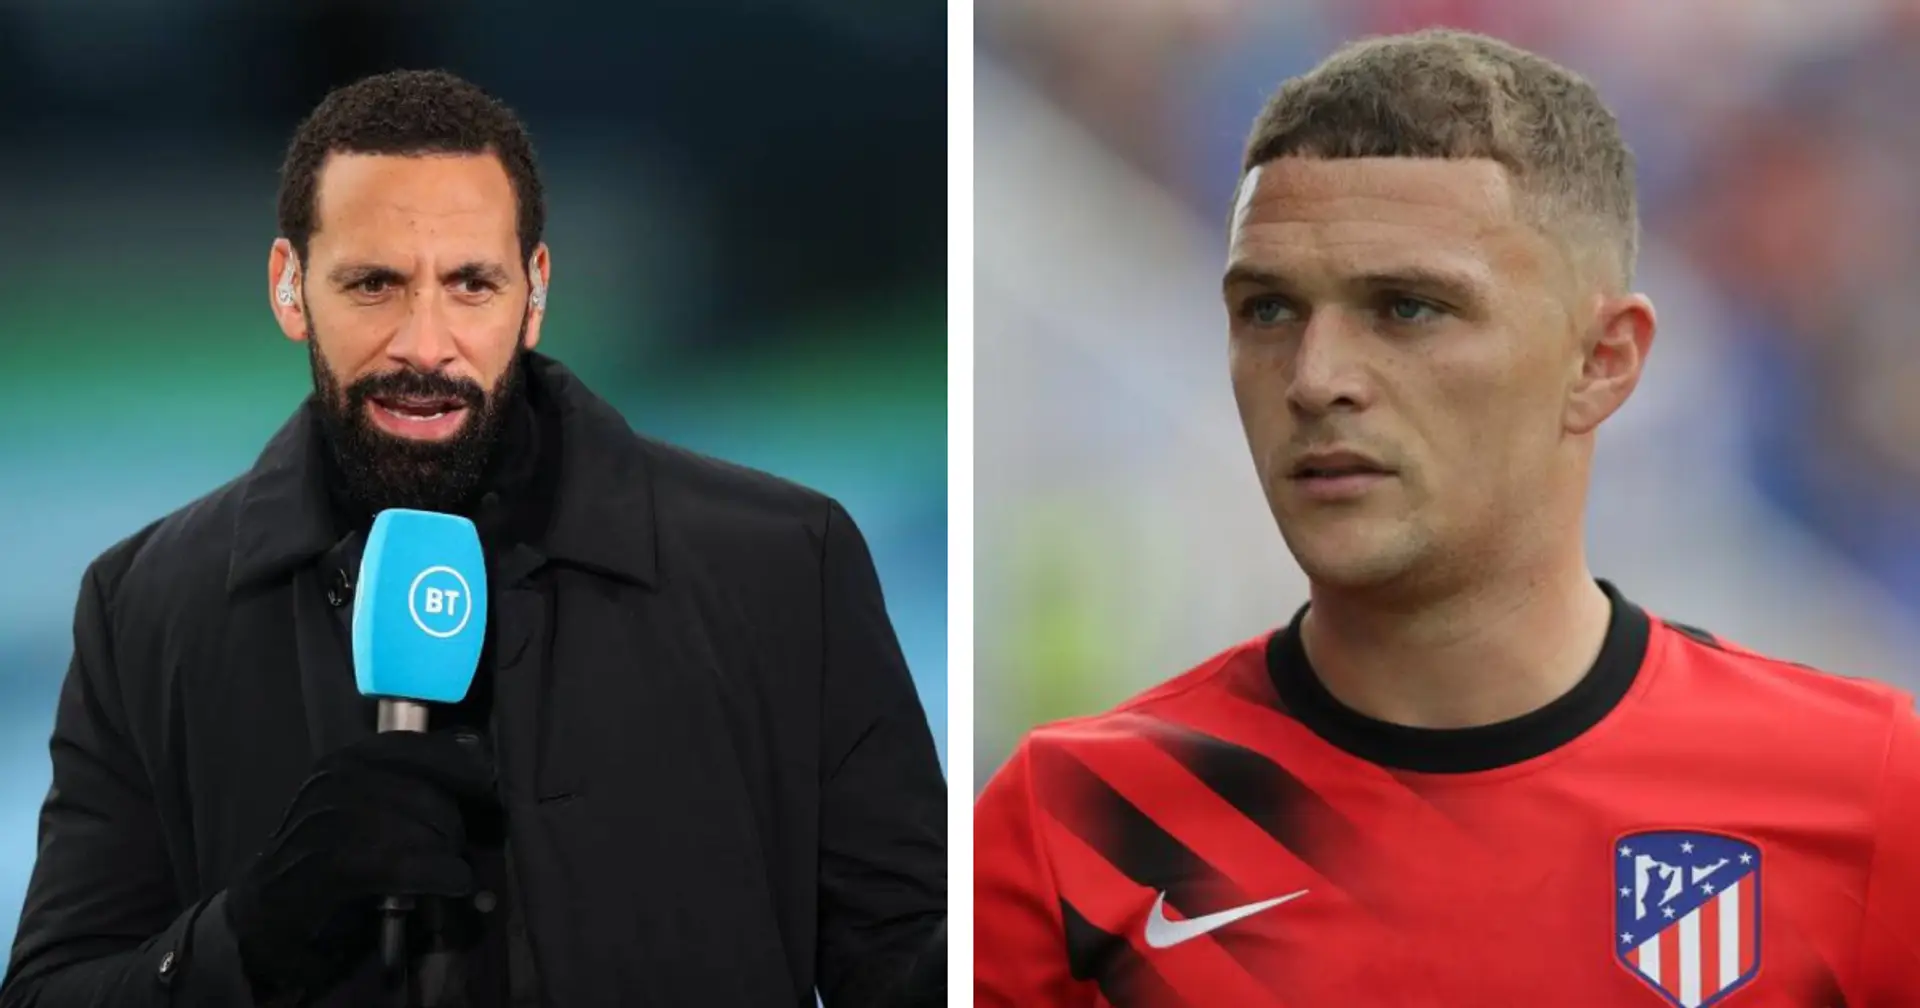 'They spent £50m on Wan-Bissaka': Ferdinand questions Man United's pursuit of Trippier